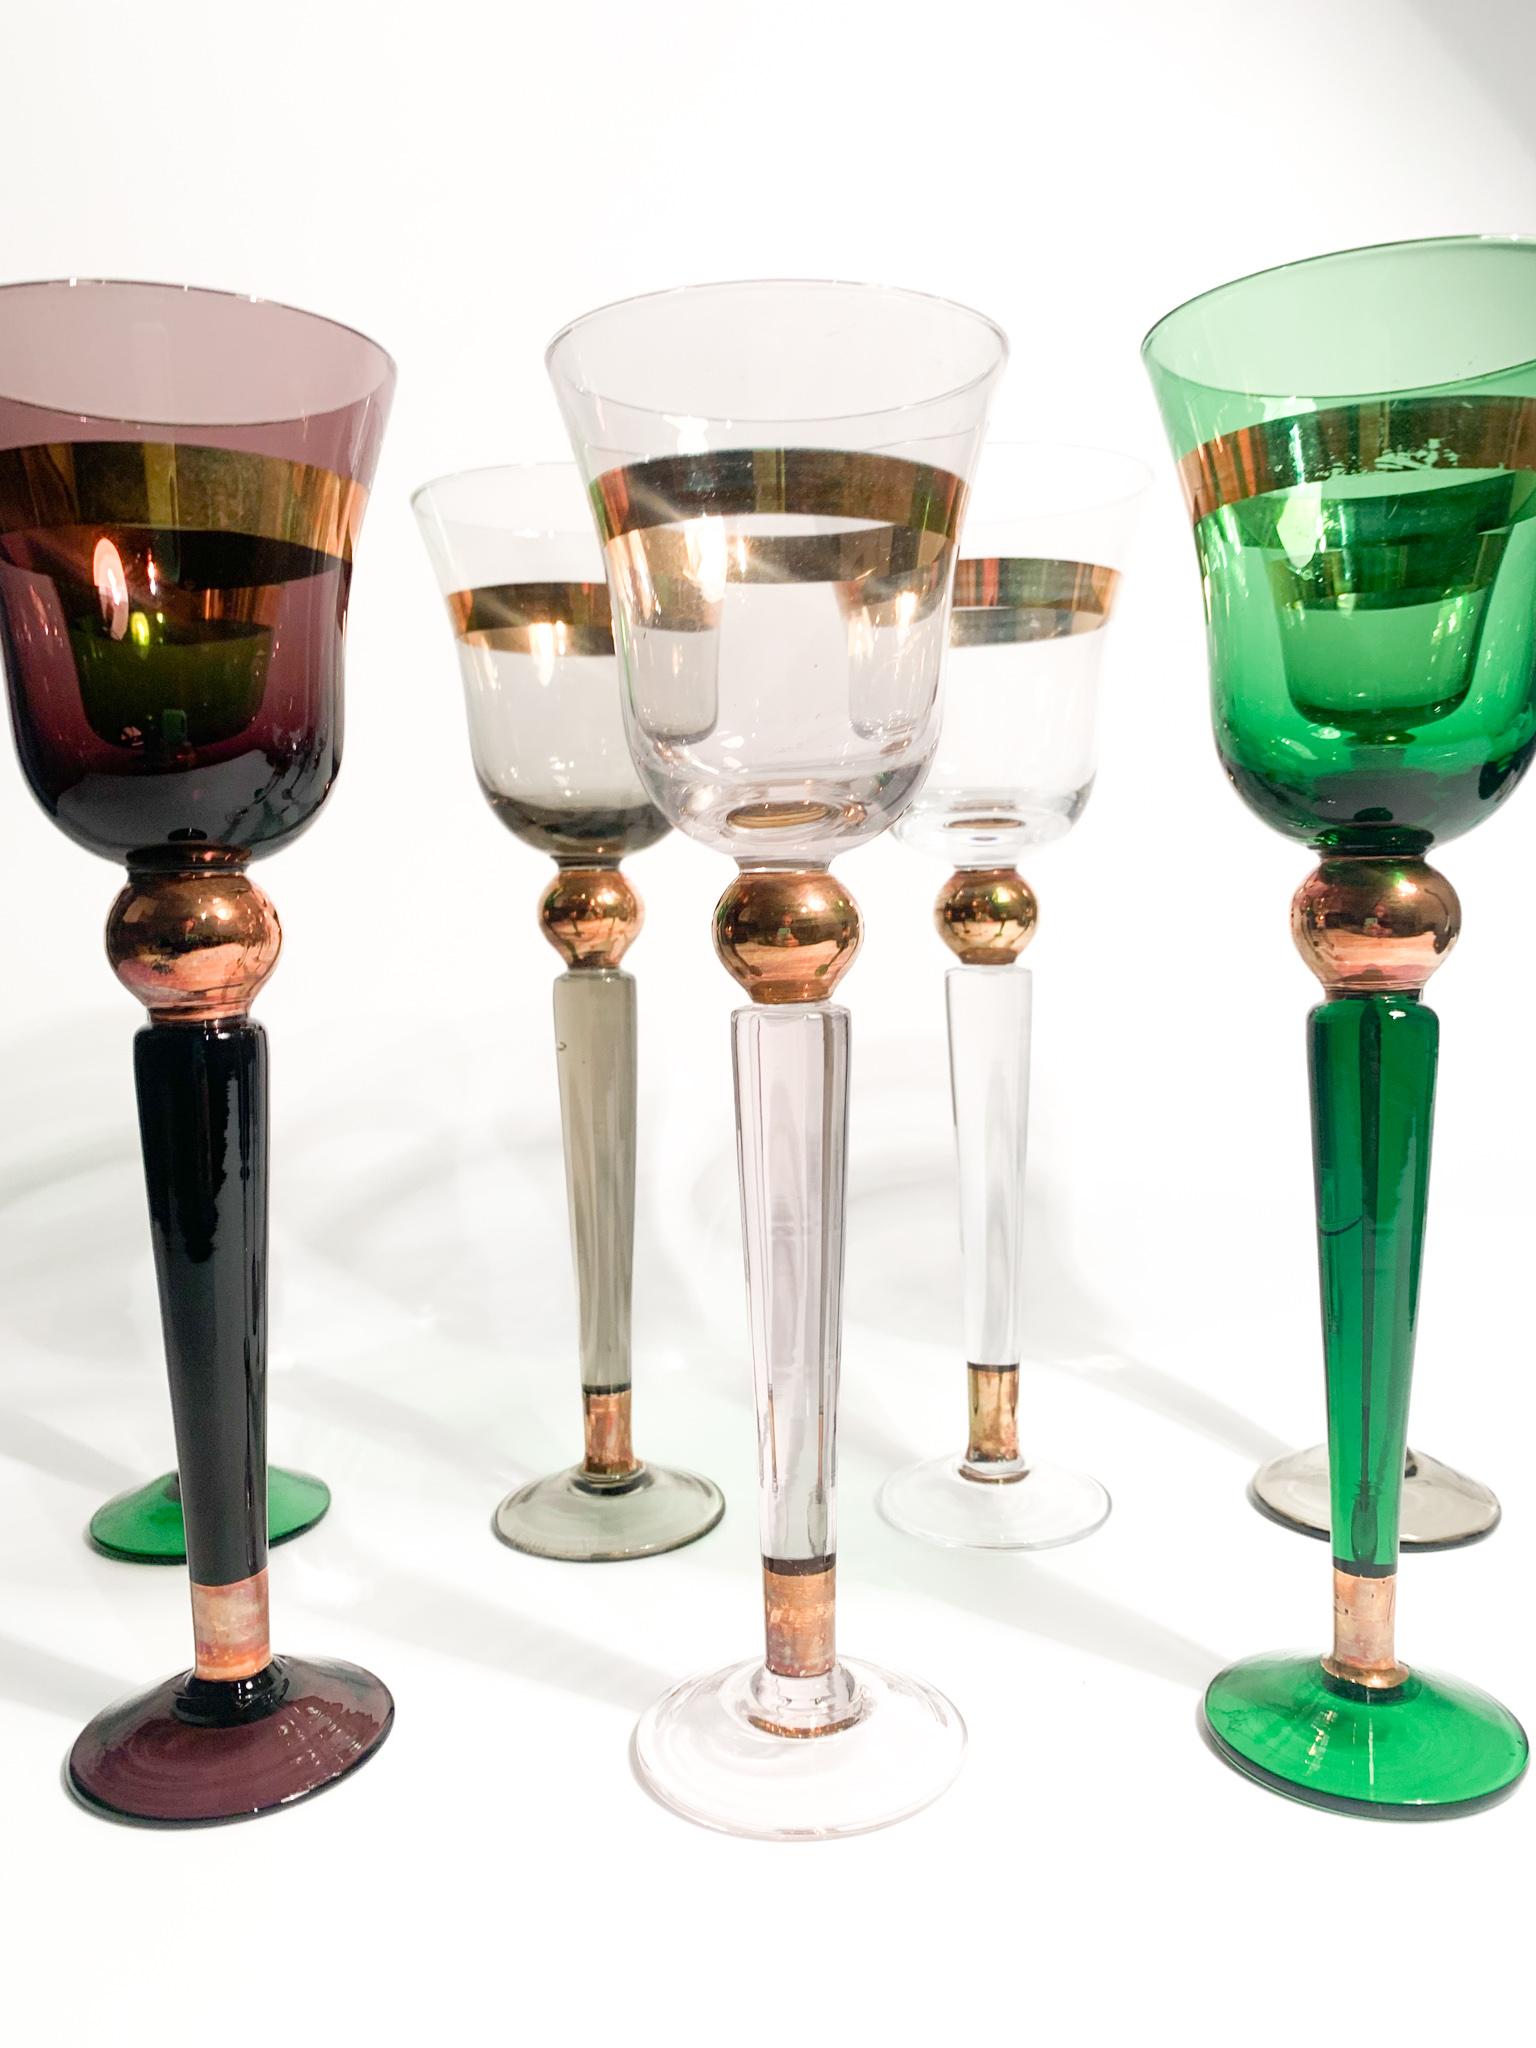 Set of 6 Venini Multicolored Murano Glass Goblets from the 1950s For Sale 13